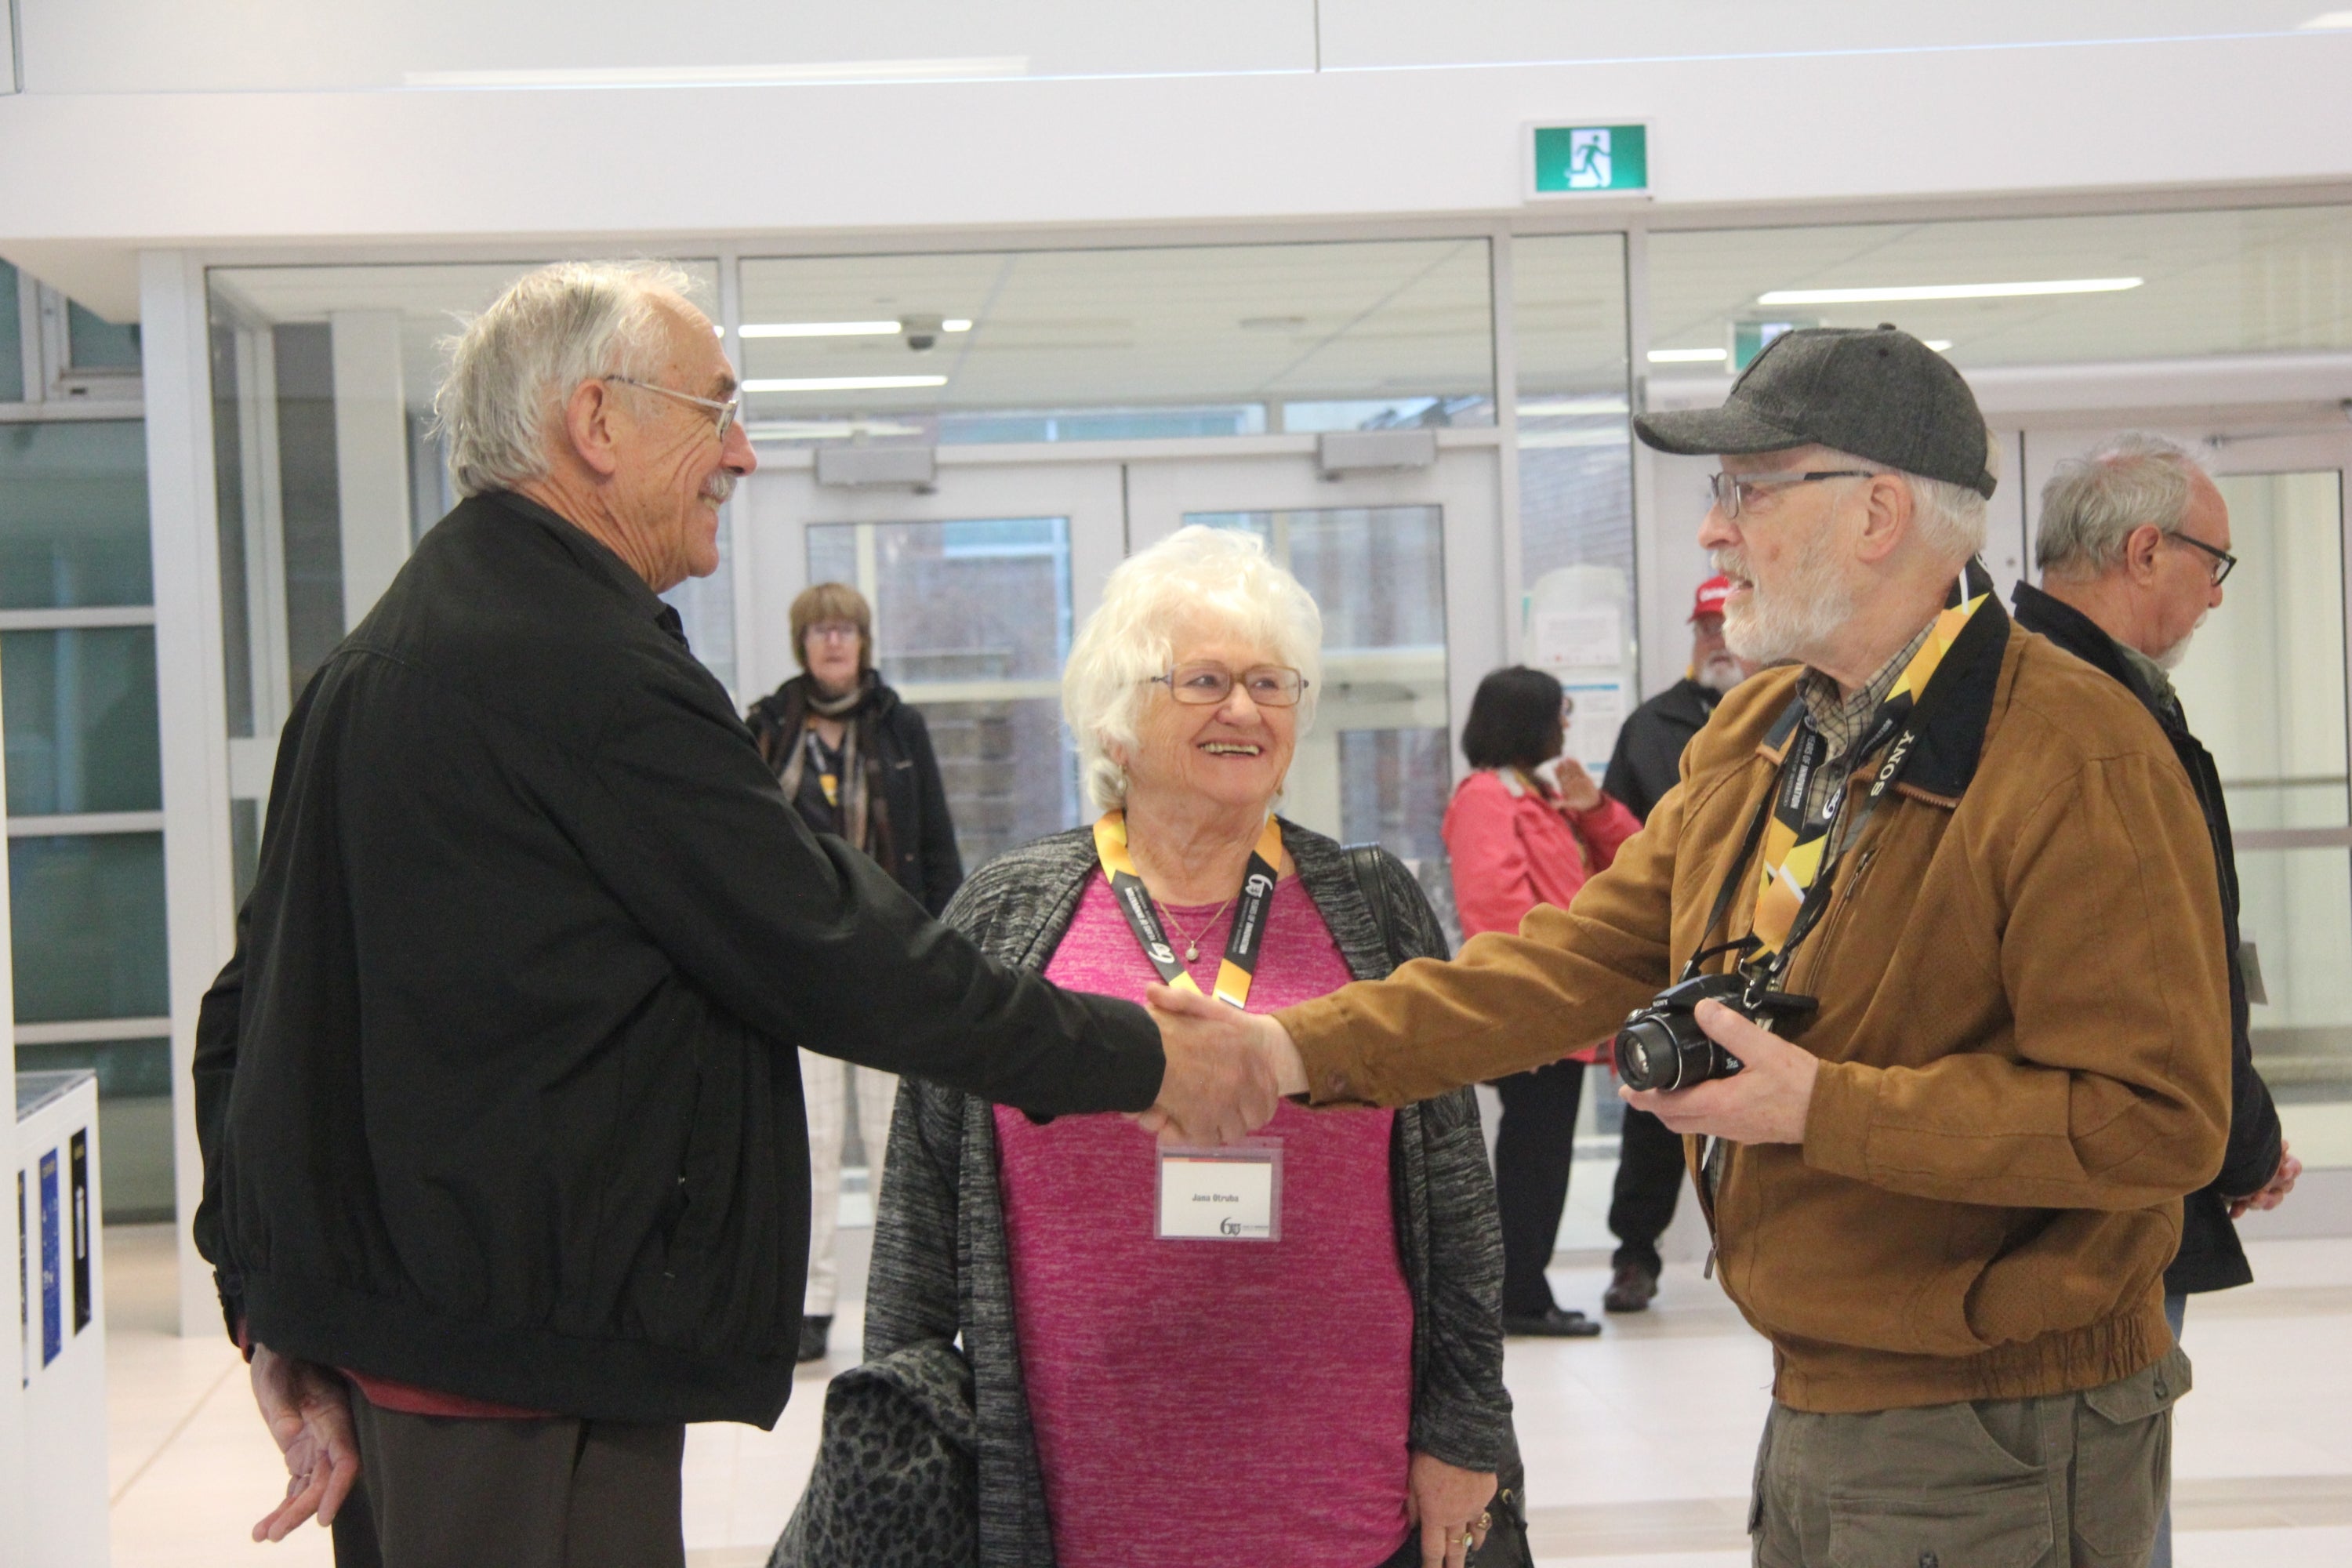 retirees shaking hands in AHS building